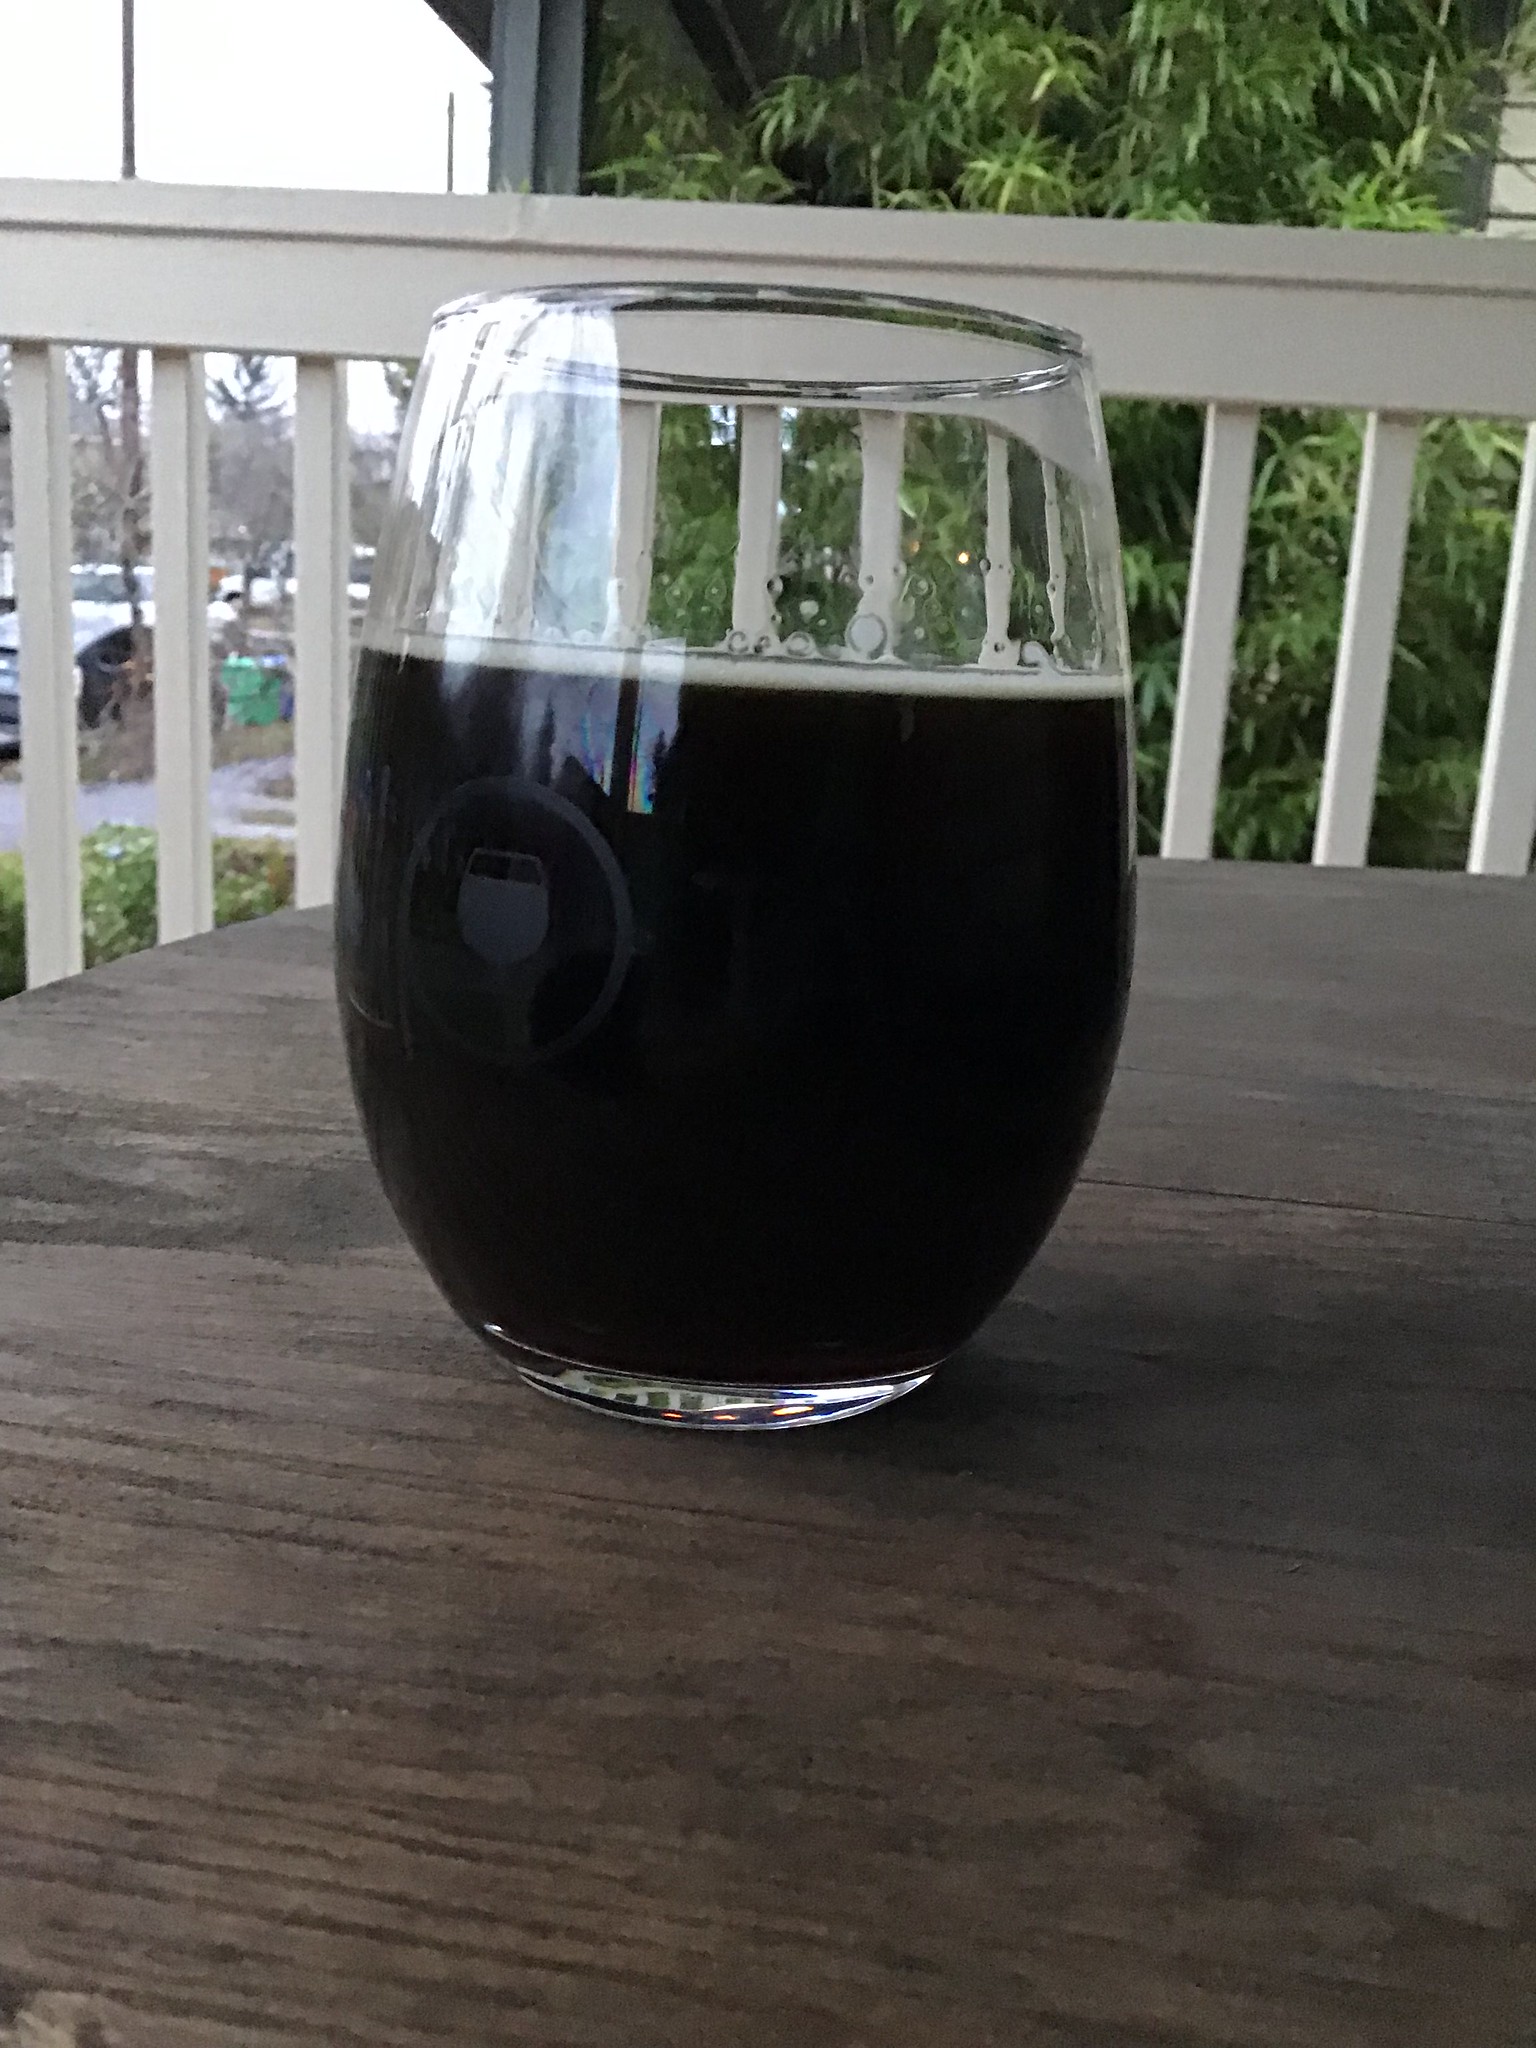 Varietal brewing's Fortress of Lies in a glass on a table outside on a cloudy day